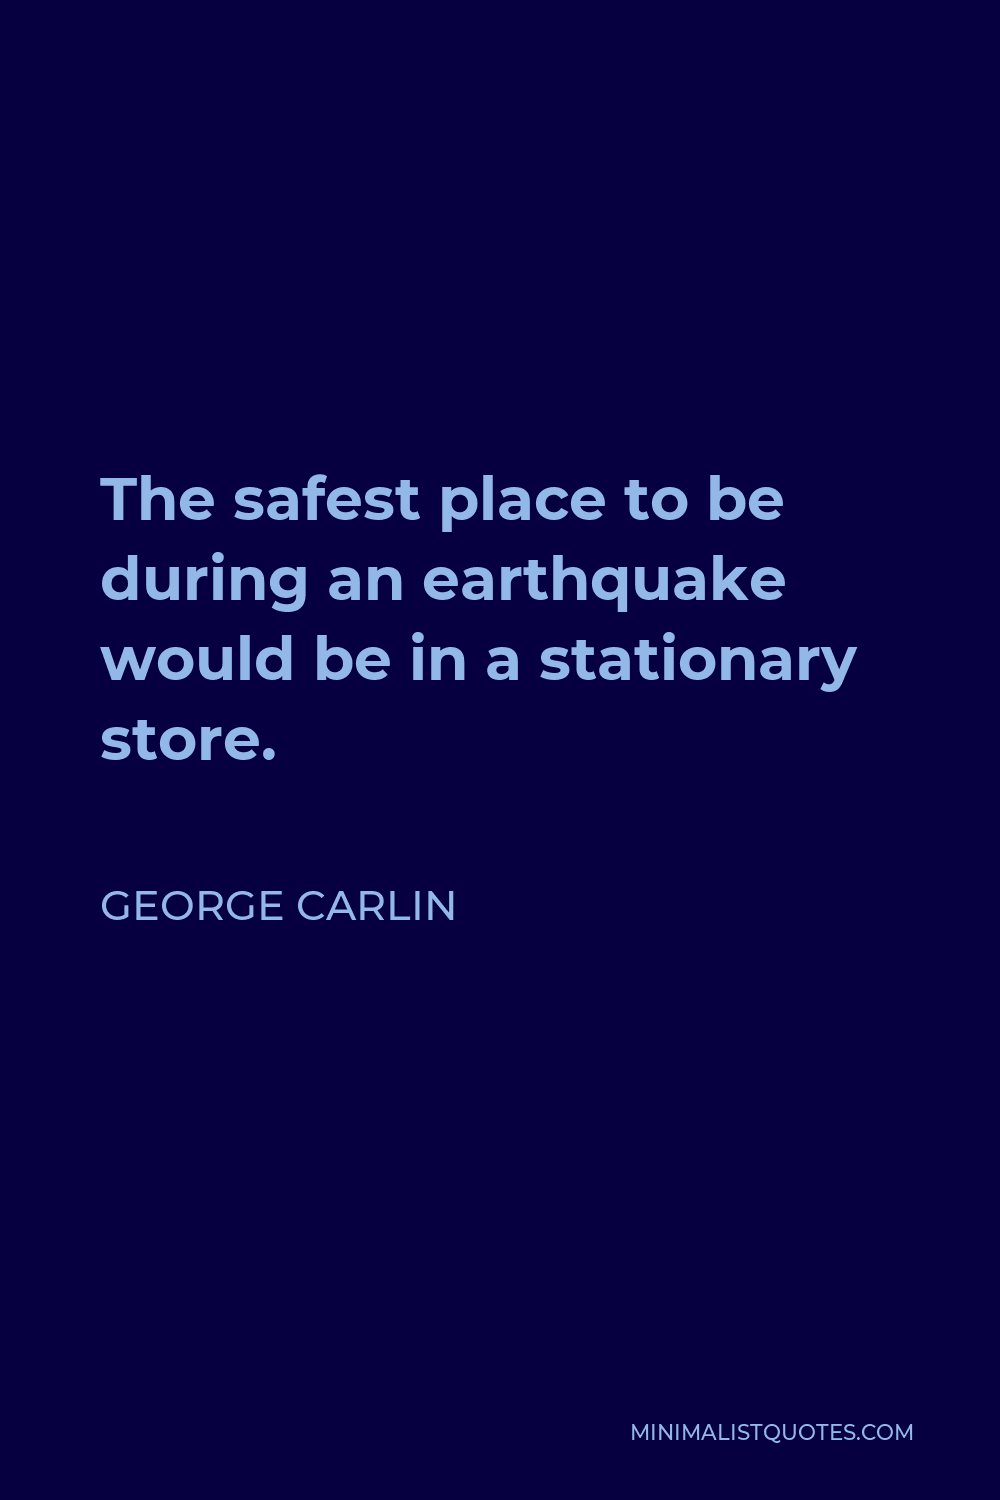 George Carlin Quote - The safest place to be during an earthquake would be in a stationary store.